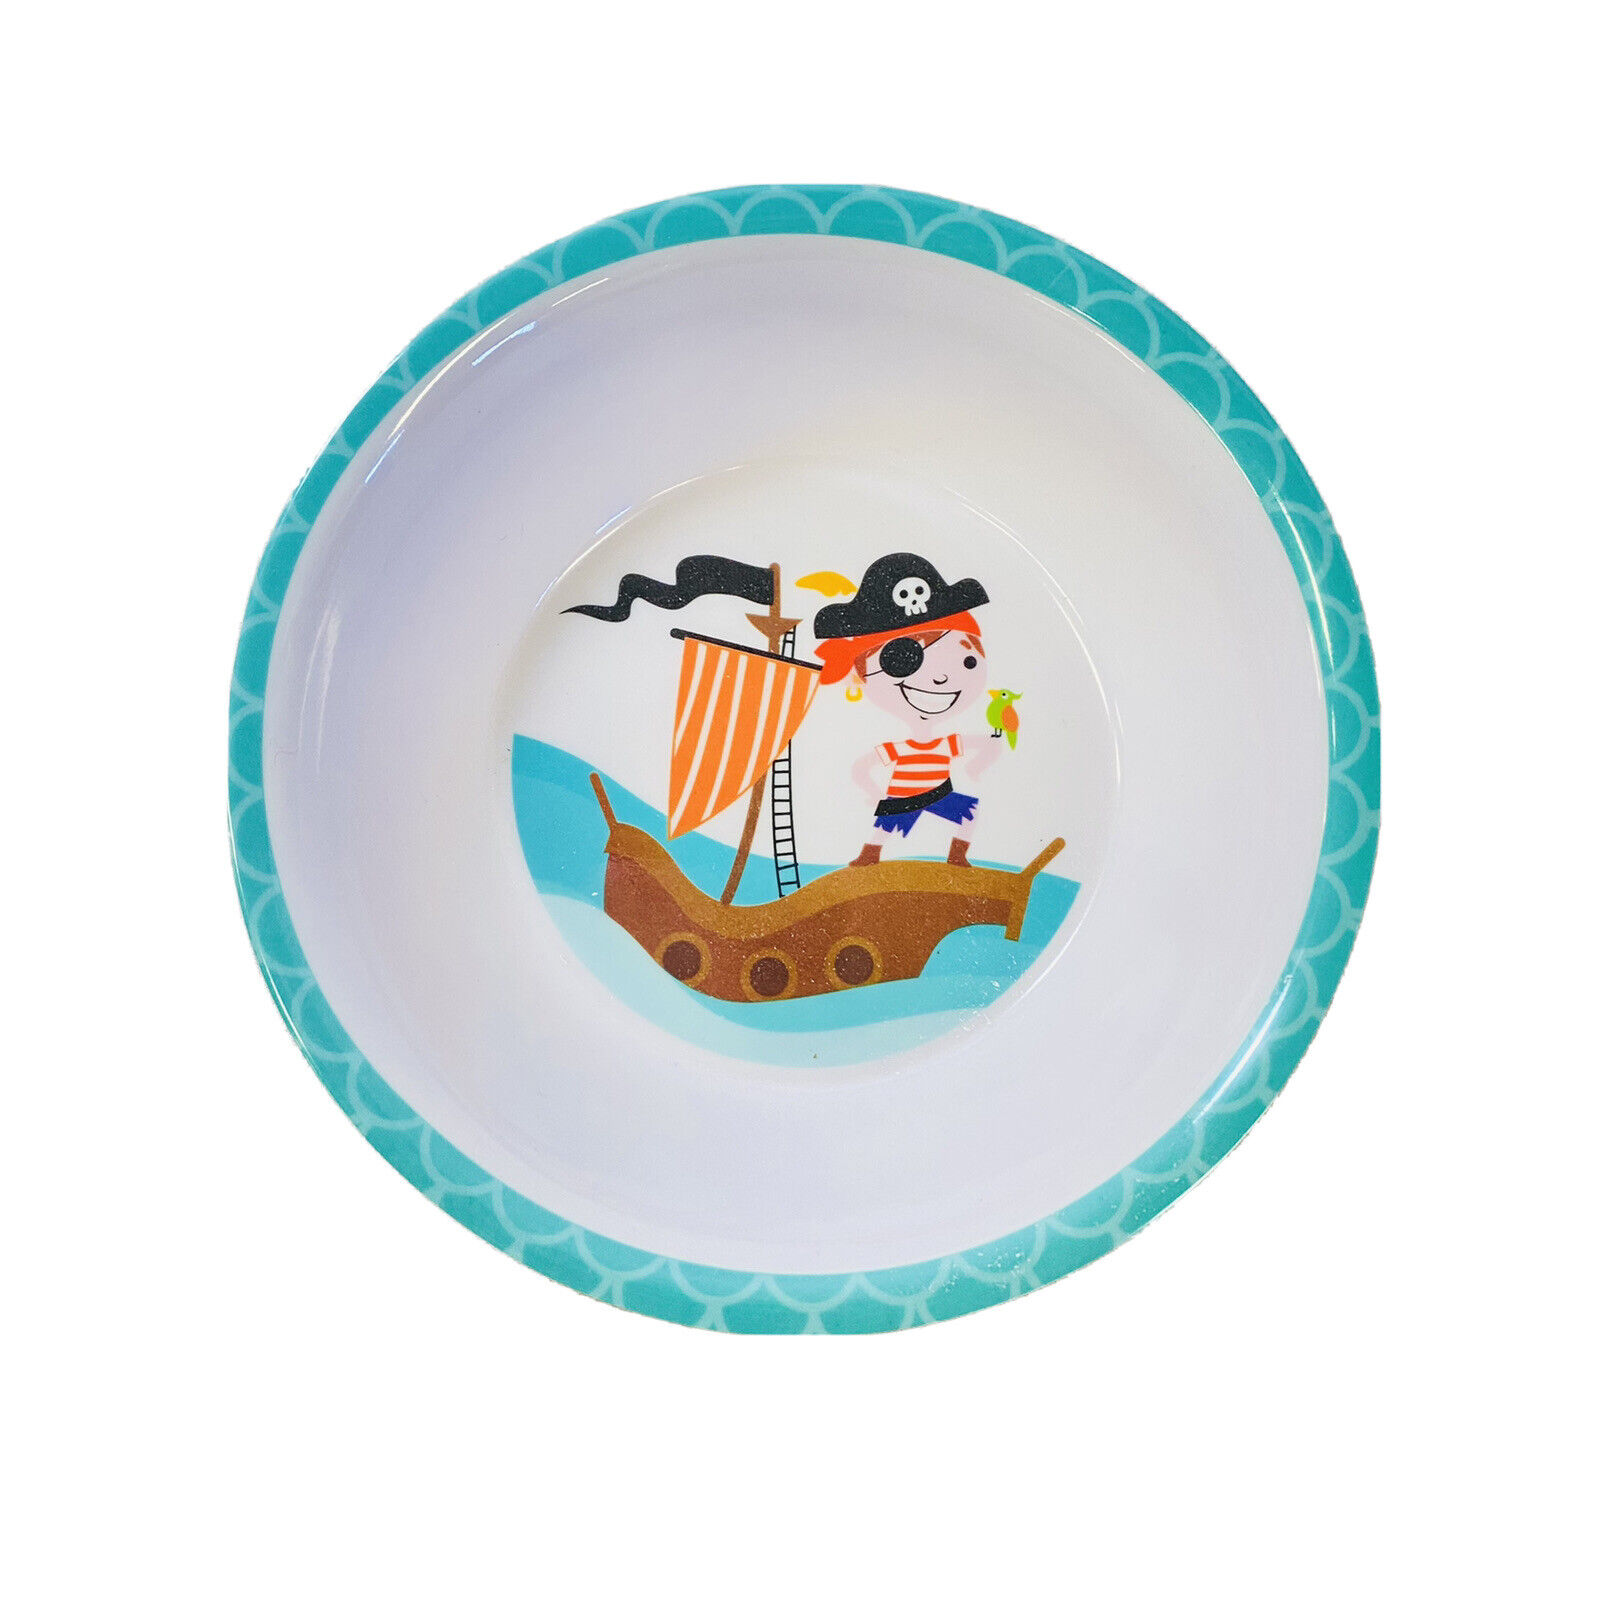 Child's Boy's Dinnerware Divided Plate Bowl & Cup Set Melamine BPA Free Pirates Regent Products n/a - фотография #3